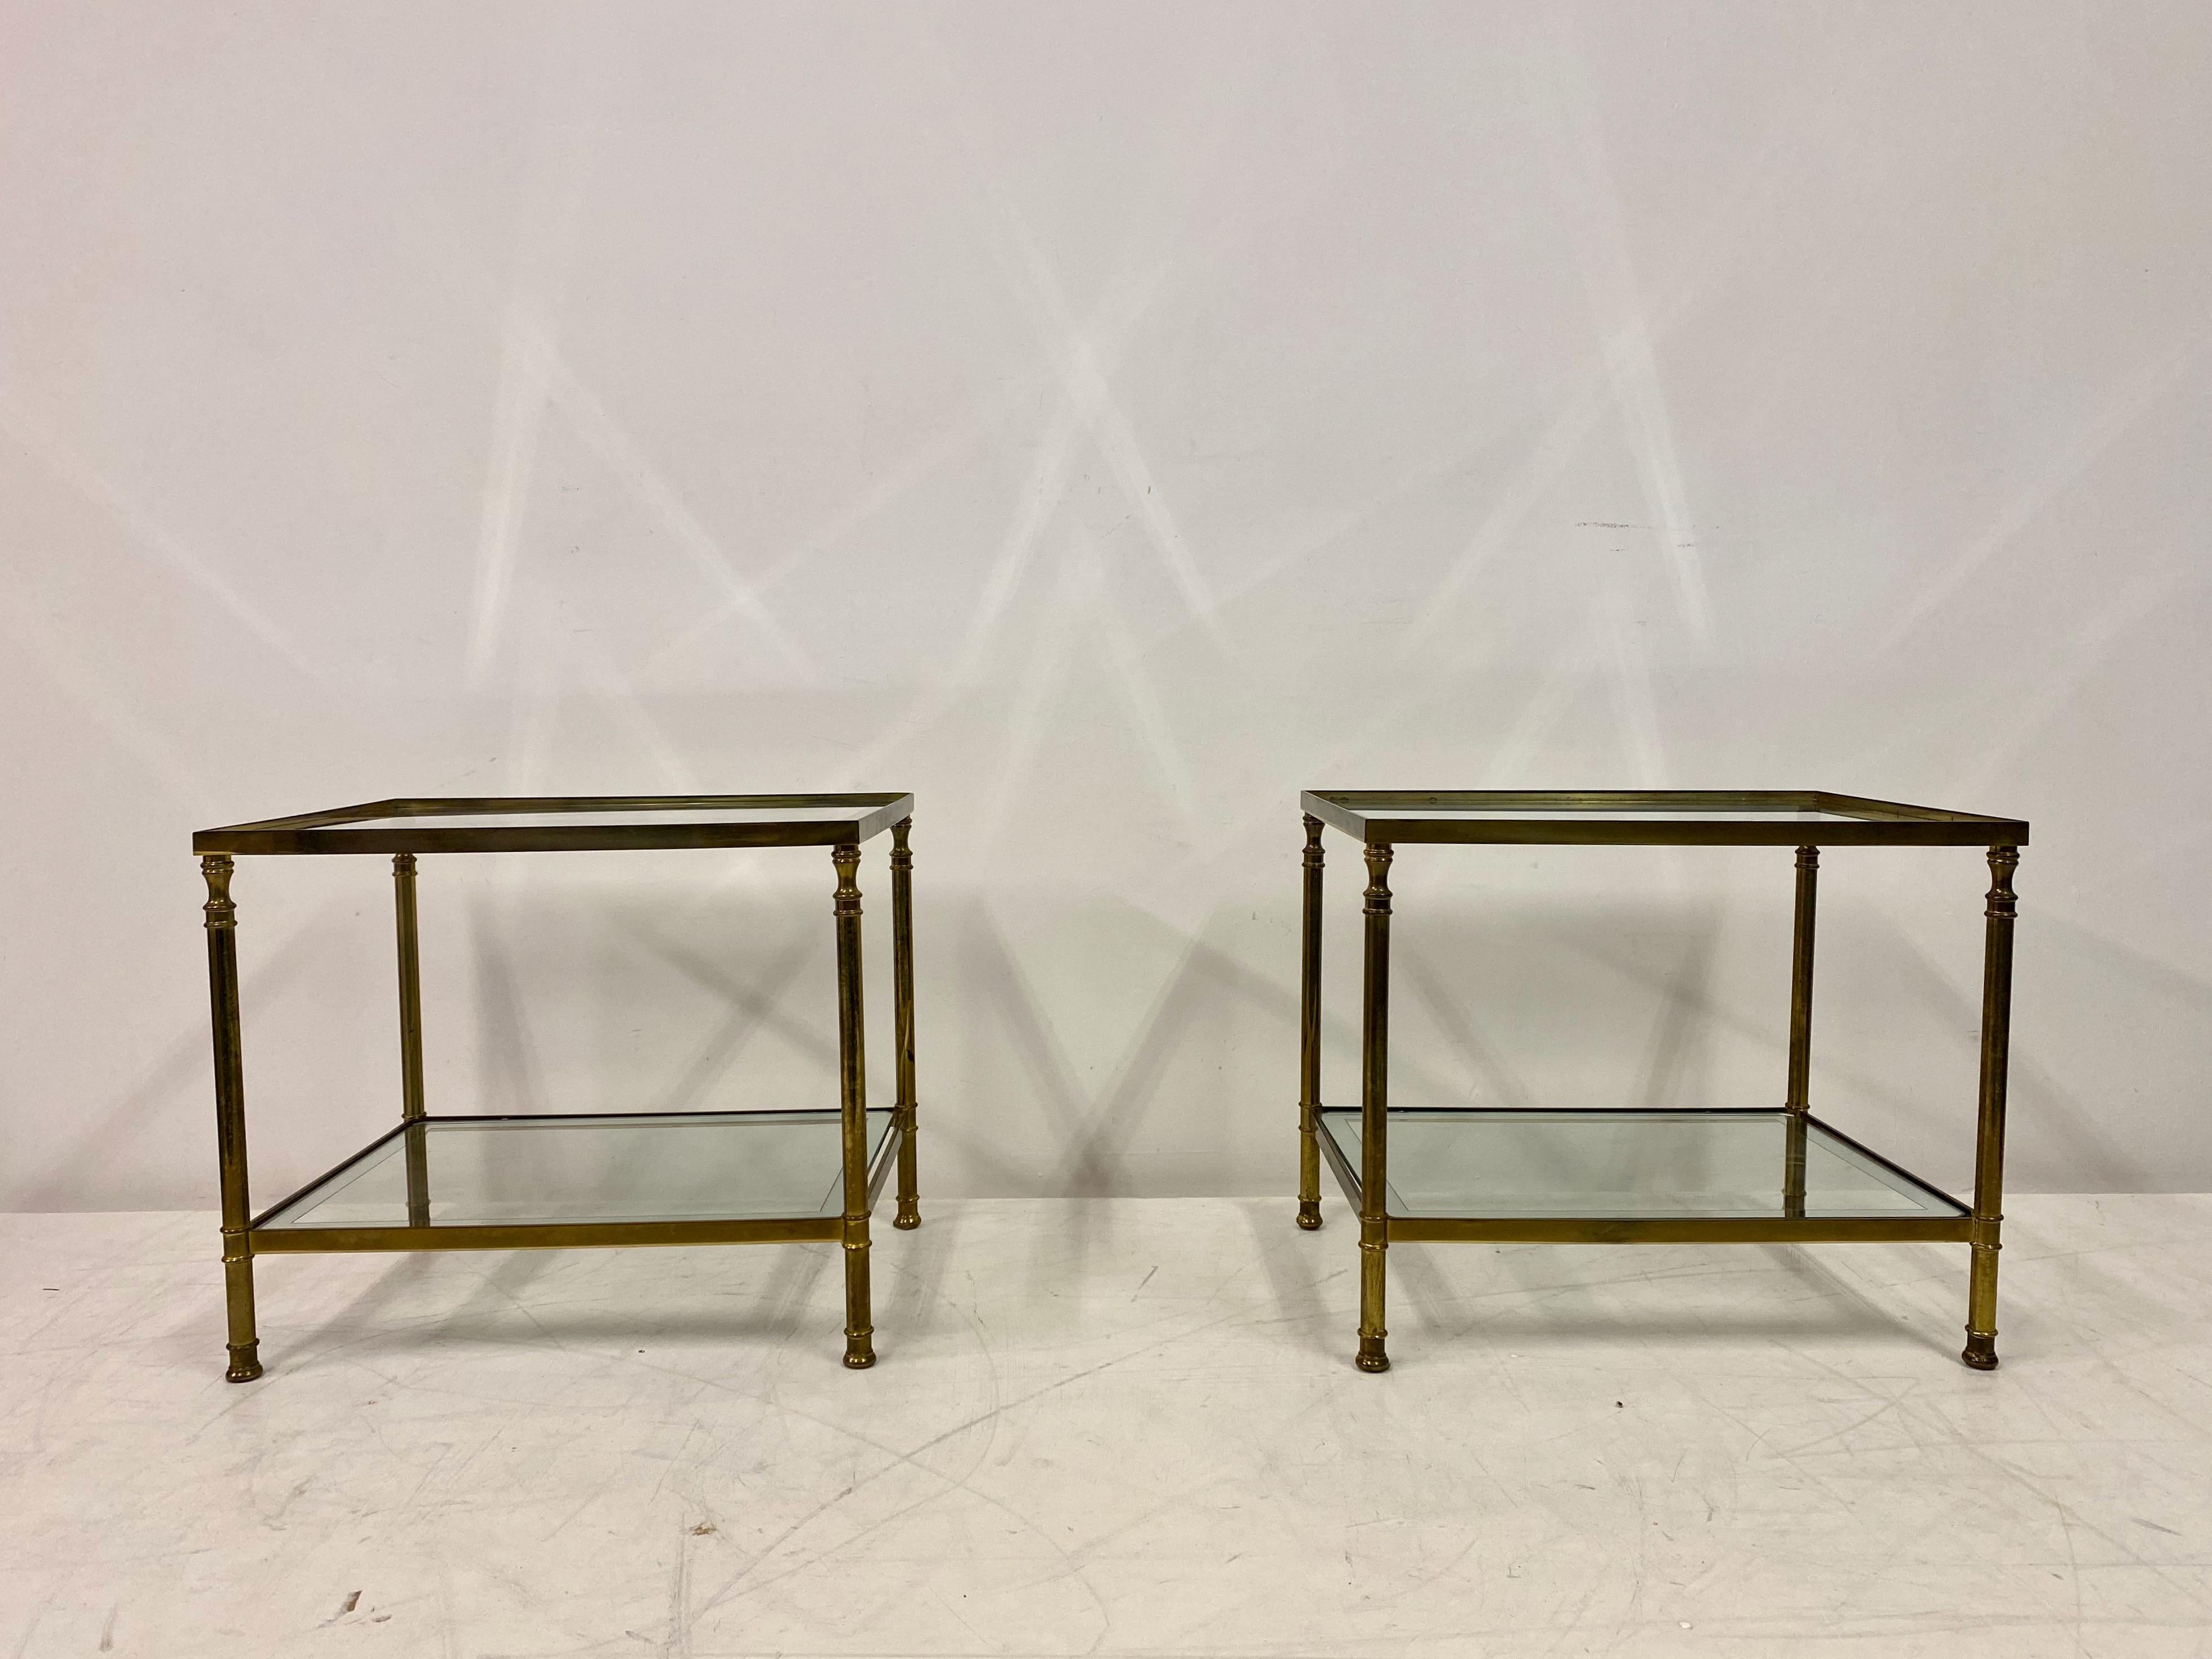 Pair of side tables.

Brass frame.

Heavy gauge frame.

Glass with mirrored edge.

1970s Italy.